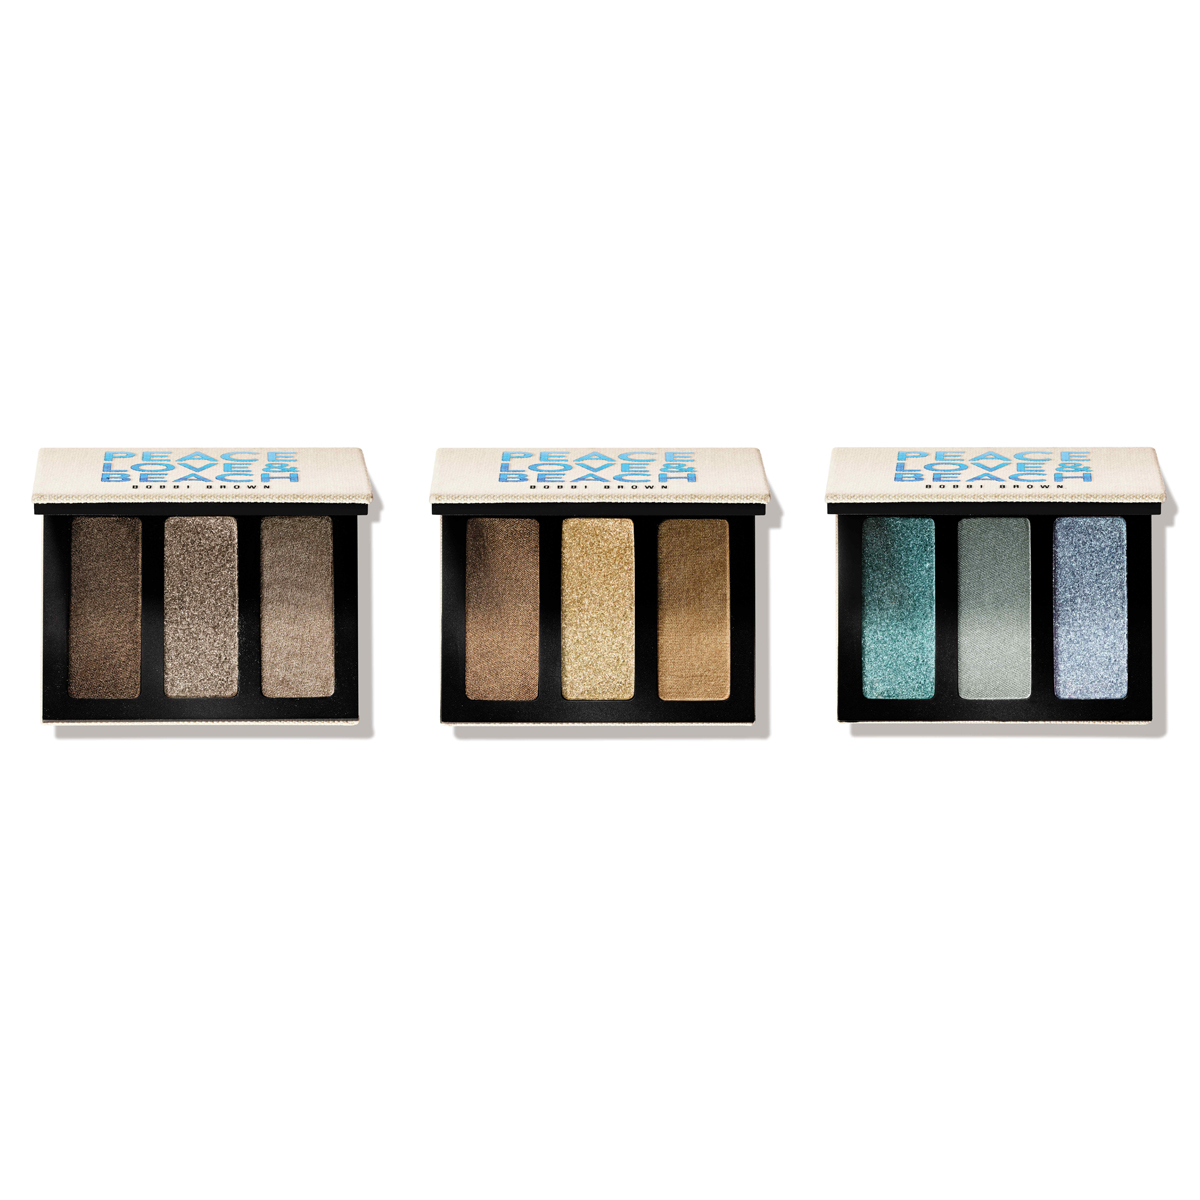 Peace, Love & Beach! Summer eye makeup doesn't get much better than these stunning eyeshadow palettes from Bobbi Brown. £29 each, John Lewis